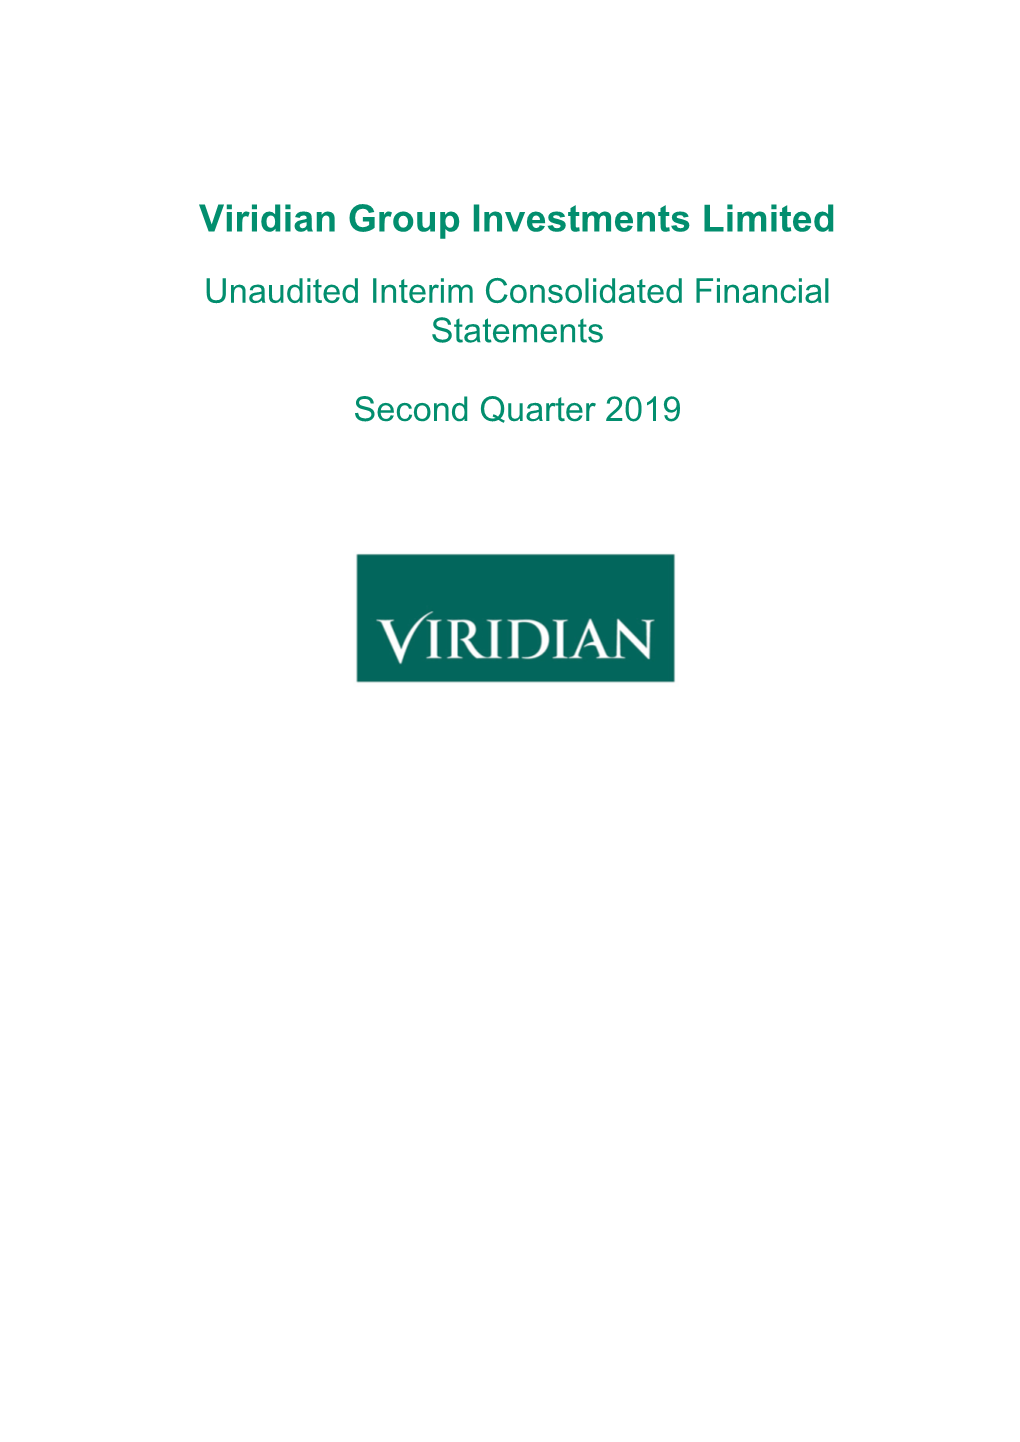 Viridian Group Investments Limited